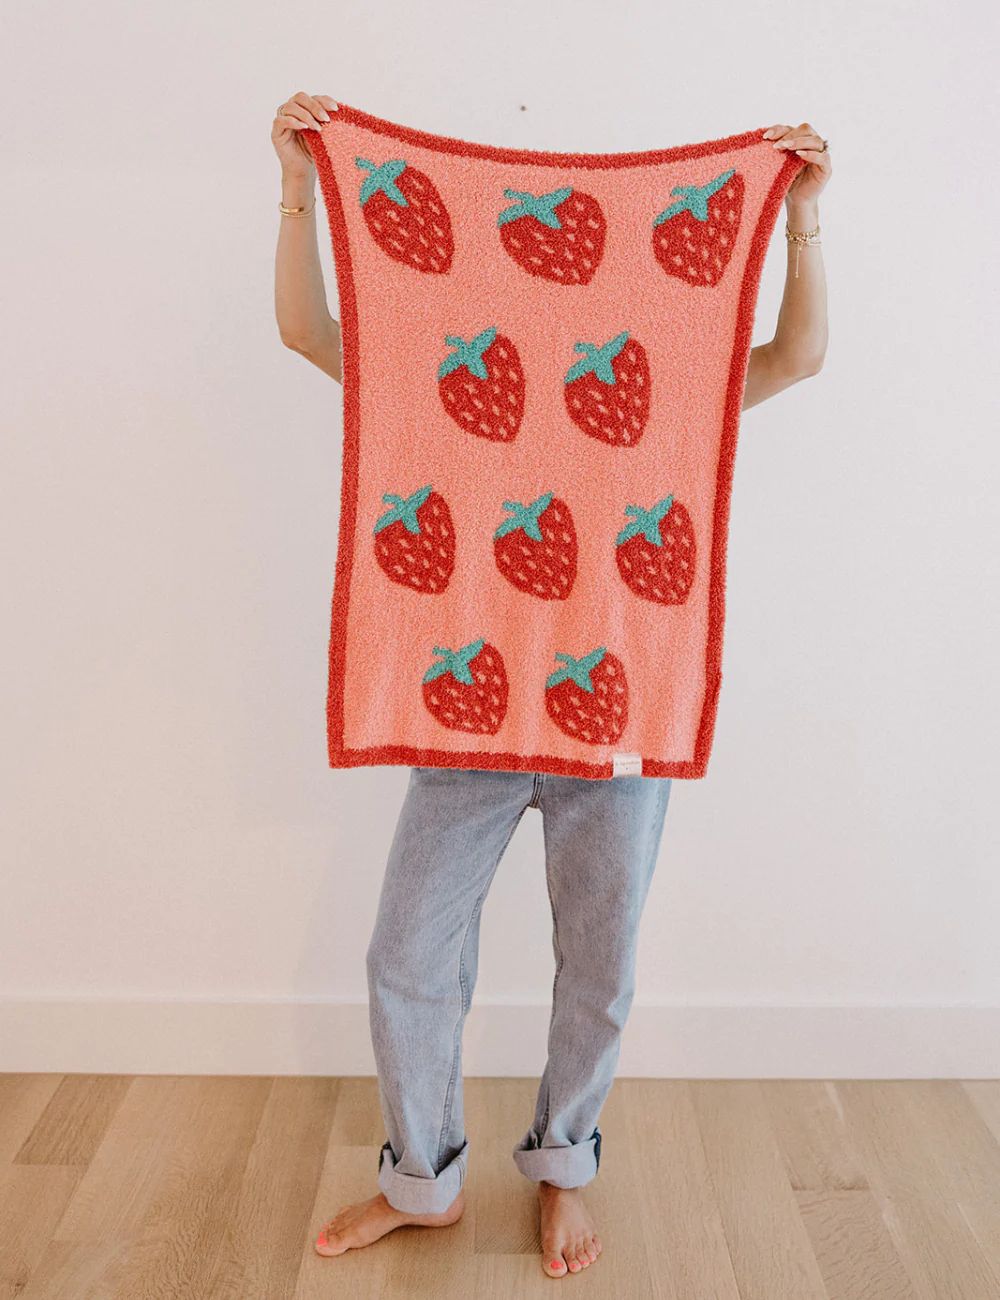 TSC x Madi Nelson: Strawberries Buttery Blanket | The Styled Collection